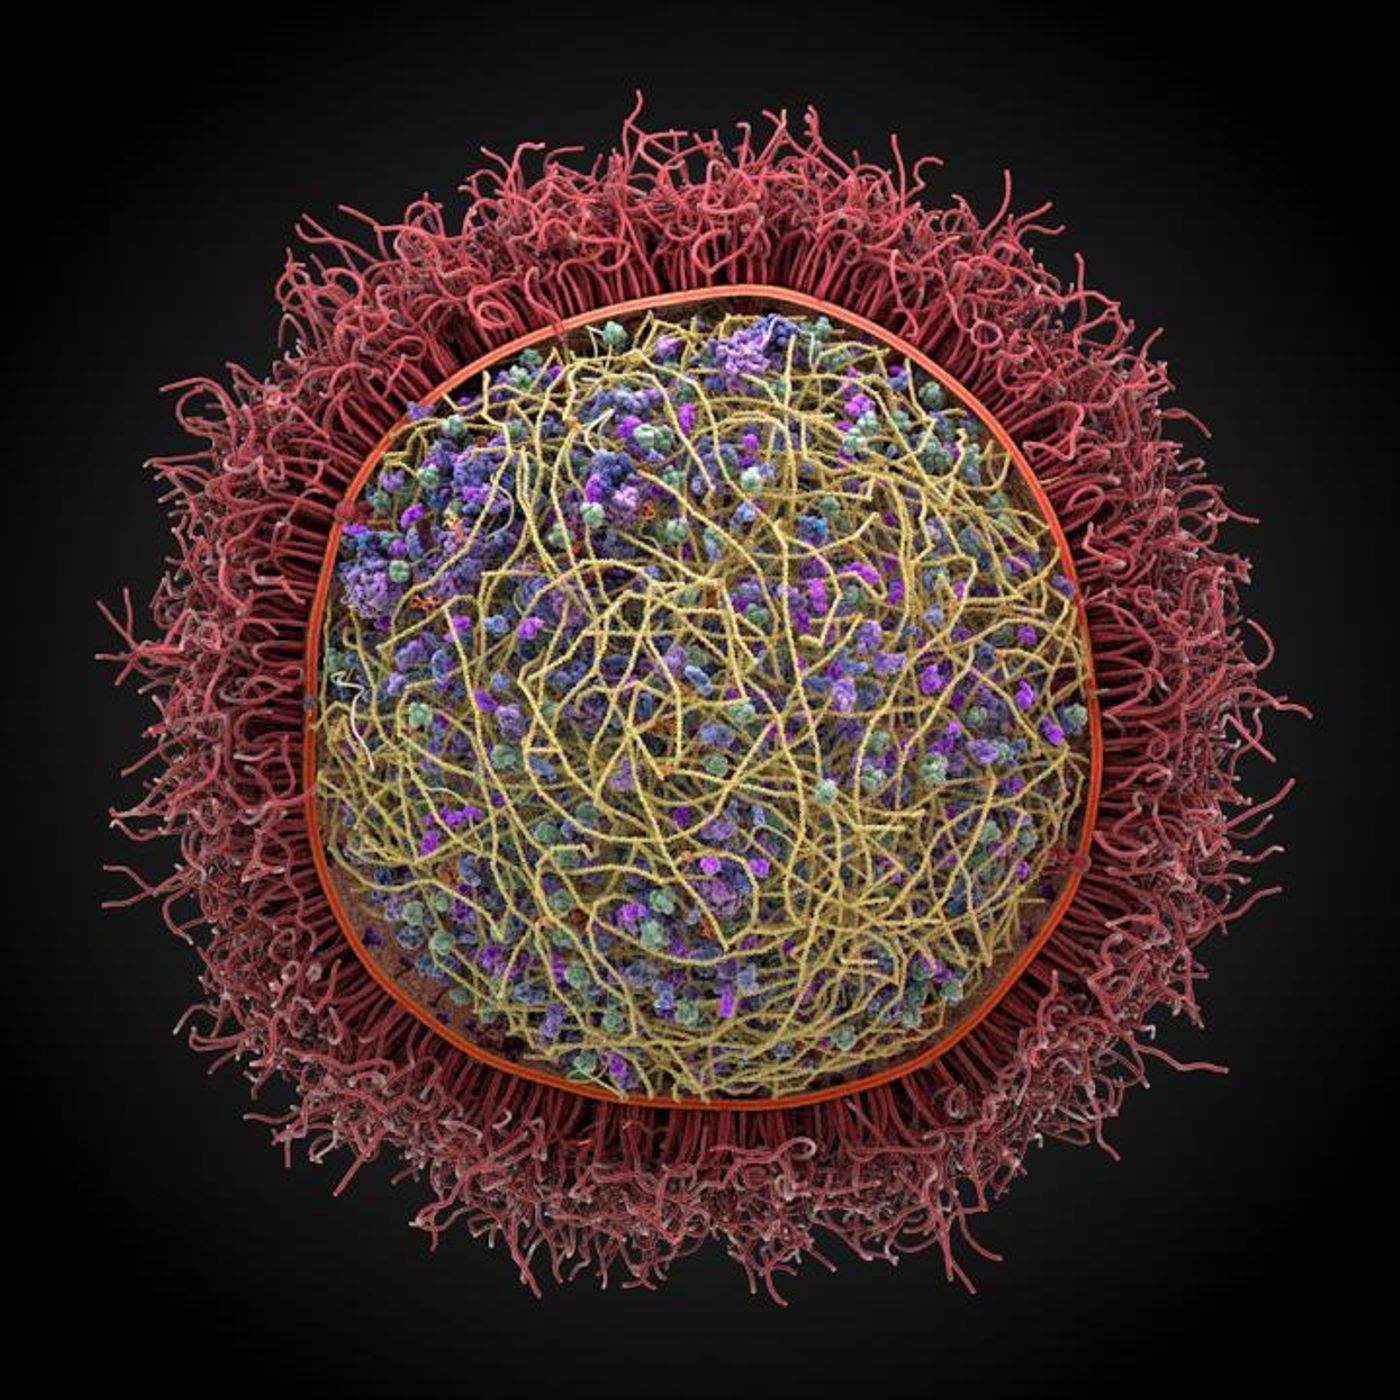 The image from co-author Arthur Olson's lab at the Scripps Research Institute shows a preliminary model of mycoplasma mycoides. Modeling by Ludovic Autin and David Goodsell, rendering by Adam Gardner./Credit: The Scripps Research Institute